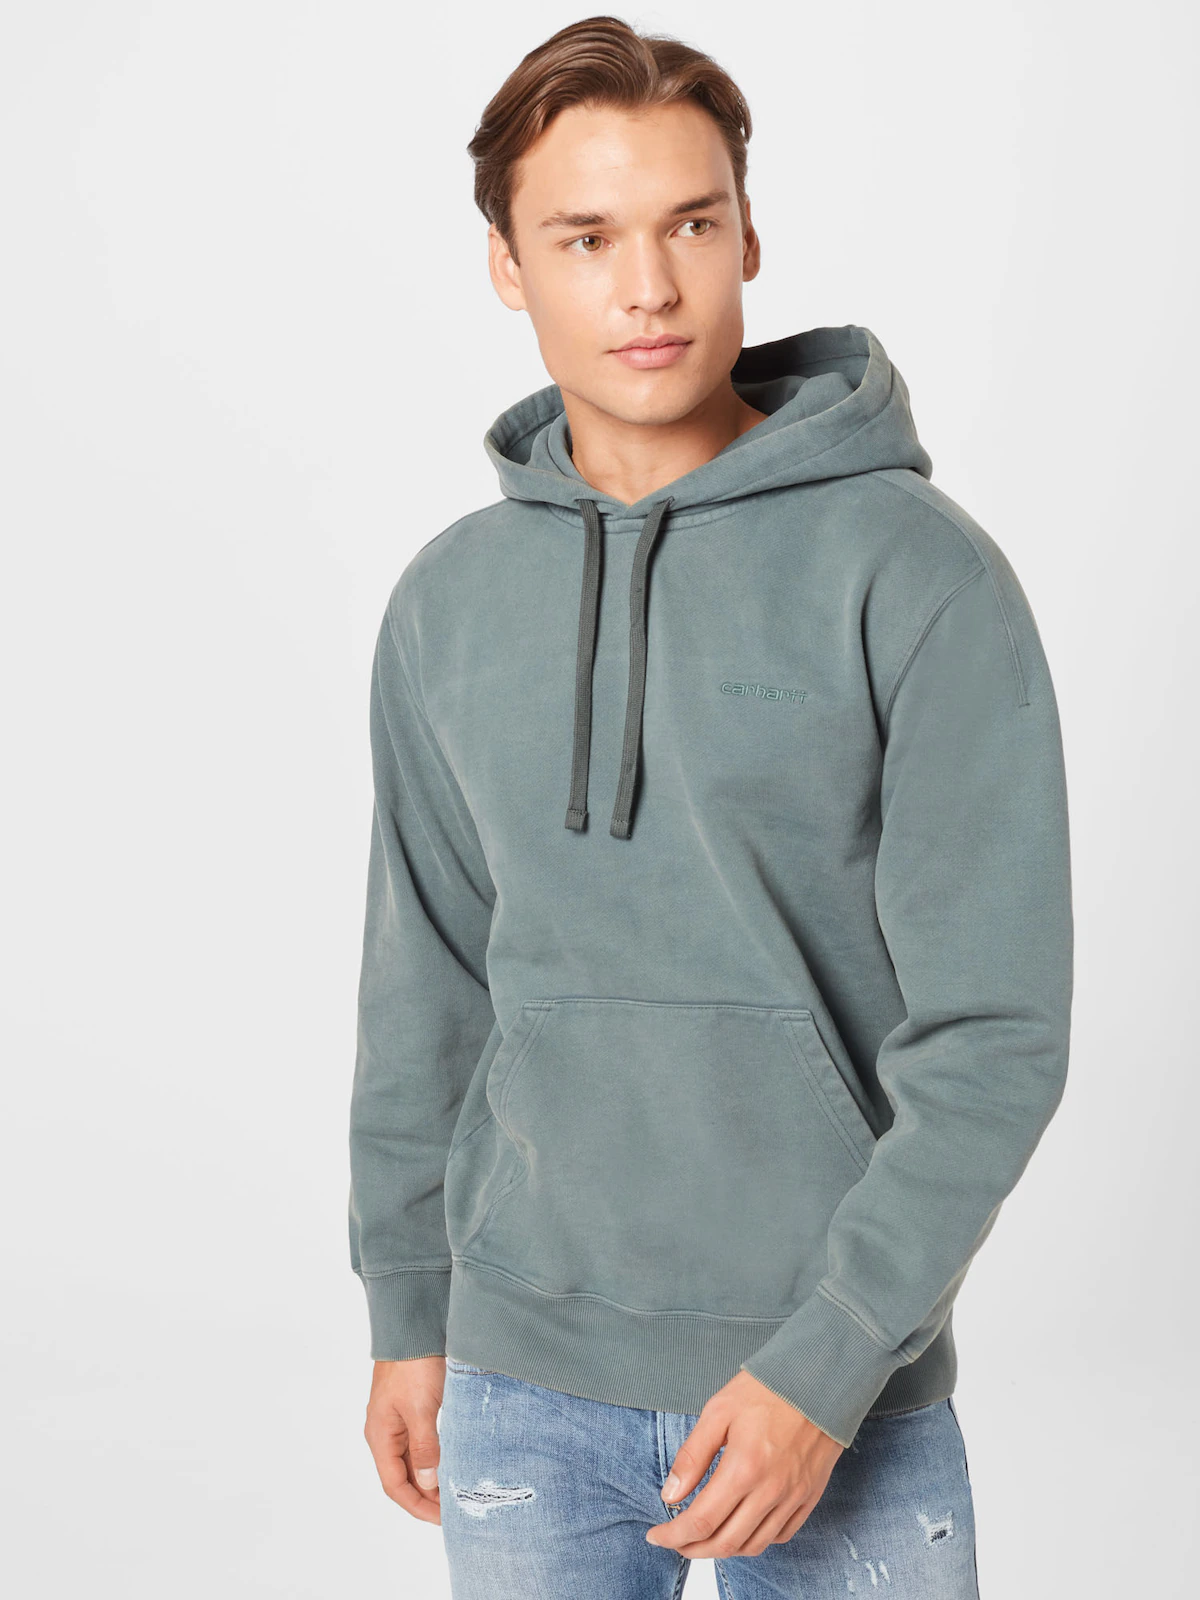 About You Carhartt hoodie